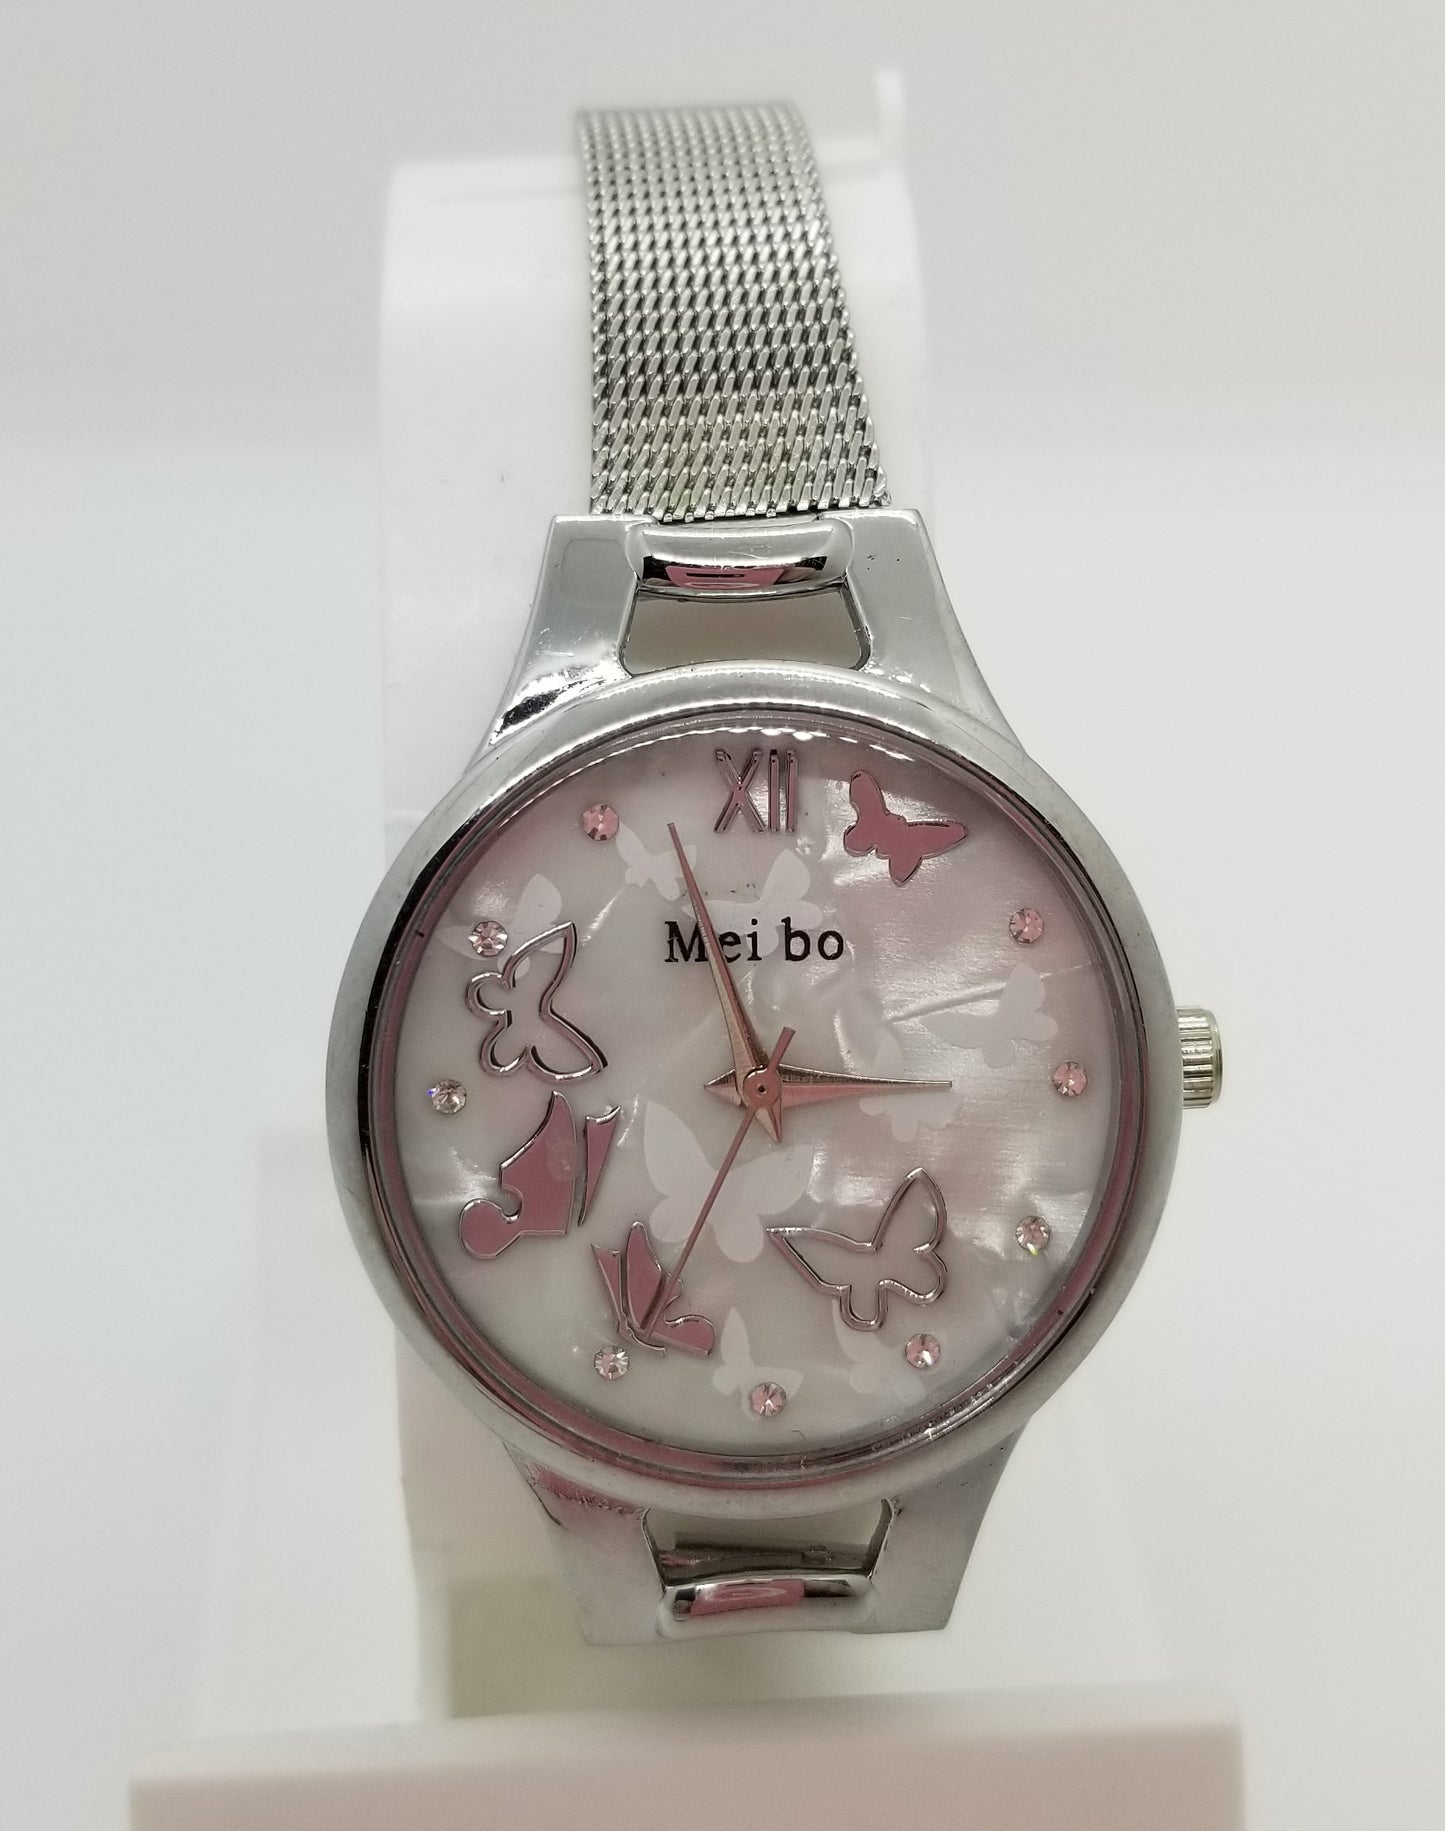 Silver base metal watch with butterflies on the dial of the